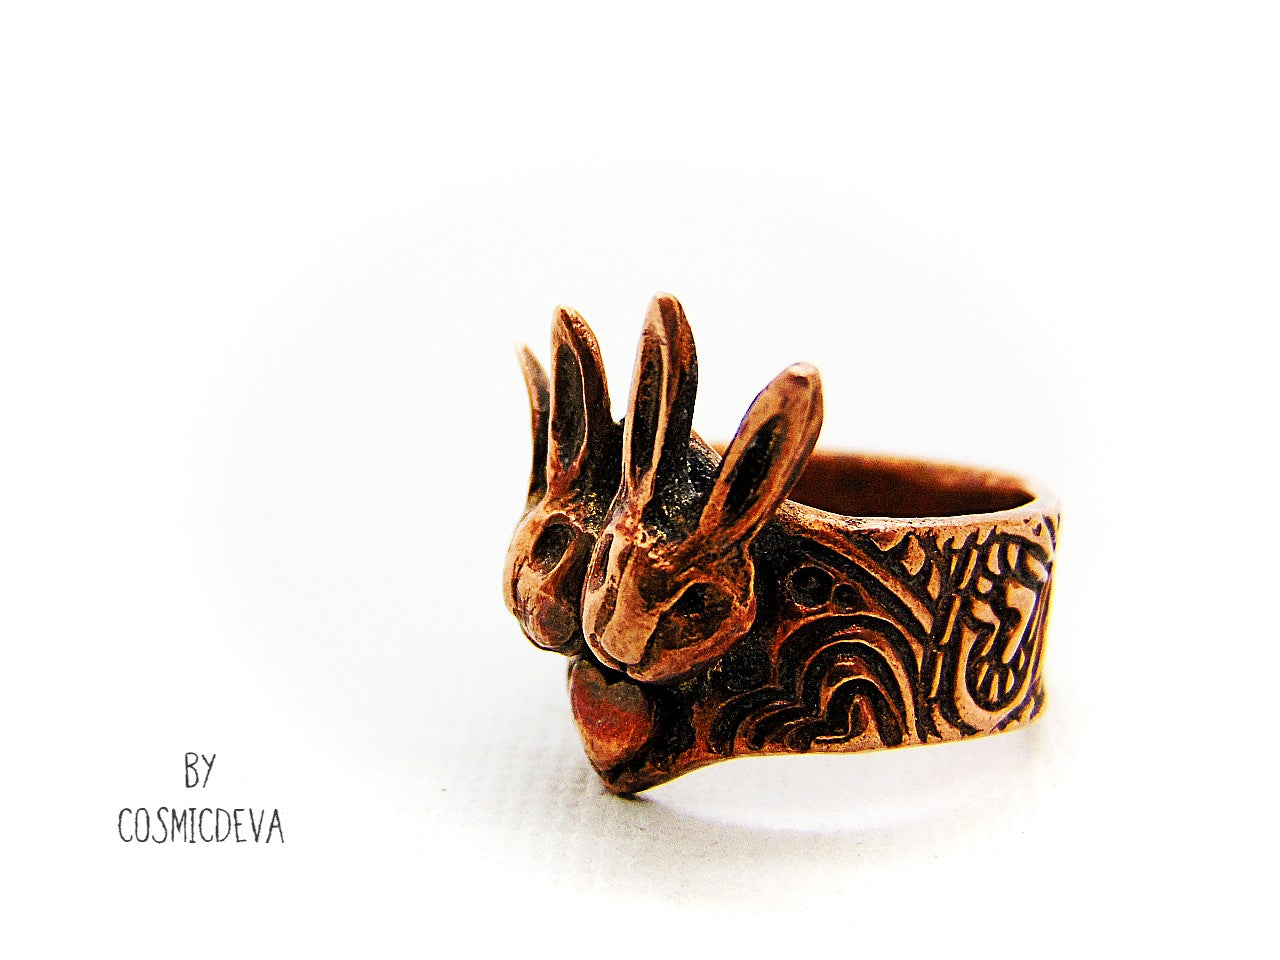 Love bunnies? Show your devotion with this gorgeous Copper Bunny Love Ring! Crafted by hand, it features two snuggled bunny heads with a heart in the middle, plus a textured shank and a heart on the back. One-of-a-kind and unique, this US Size 7.5 Ring is perfect for expressing your style and your bunny appreciation!